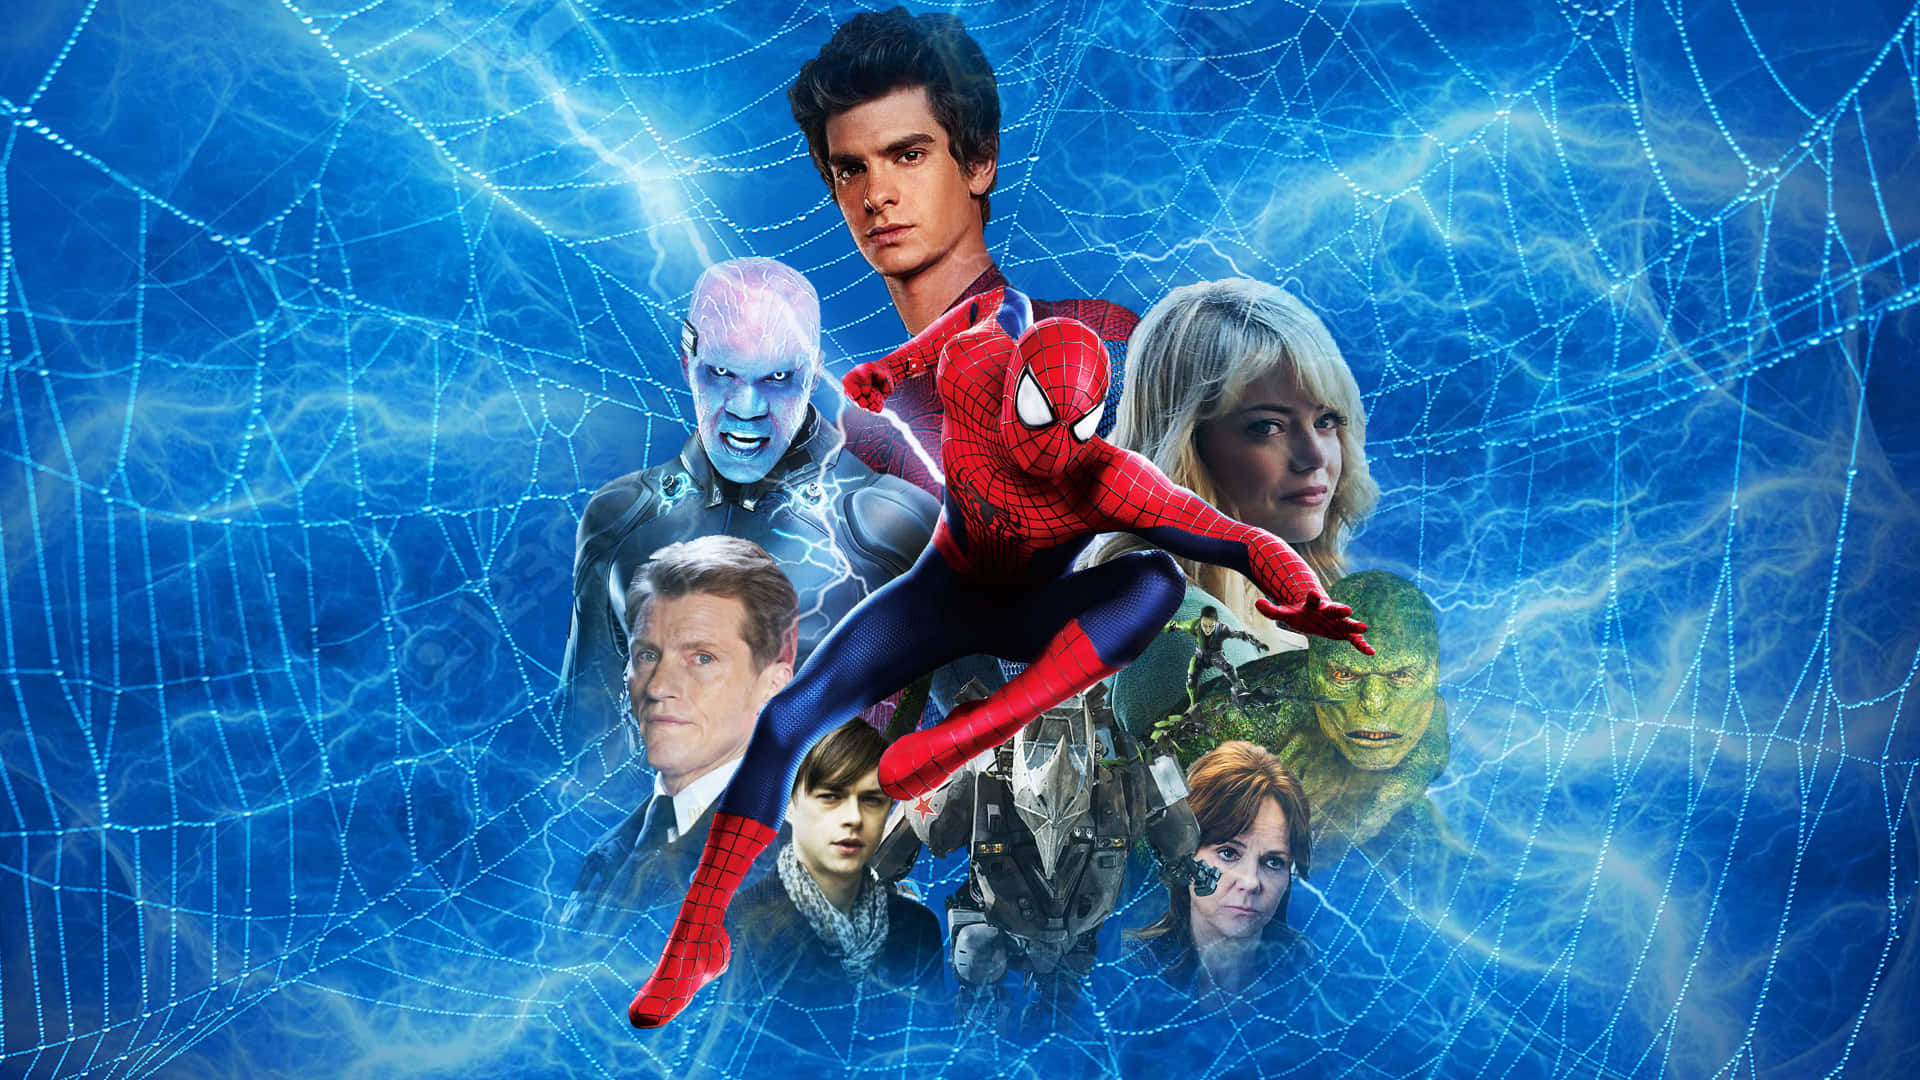 Get ready to save the world with your Spiderman powers!